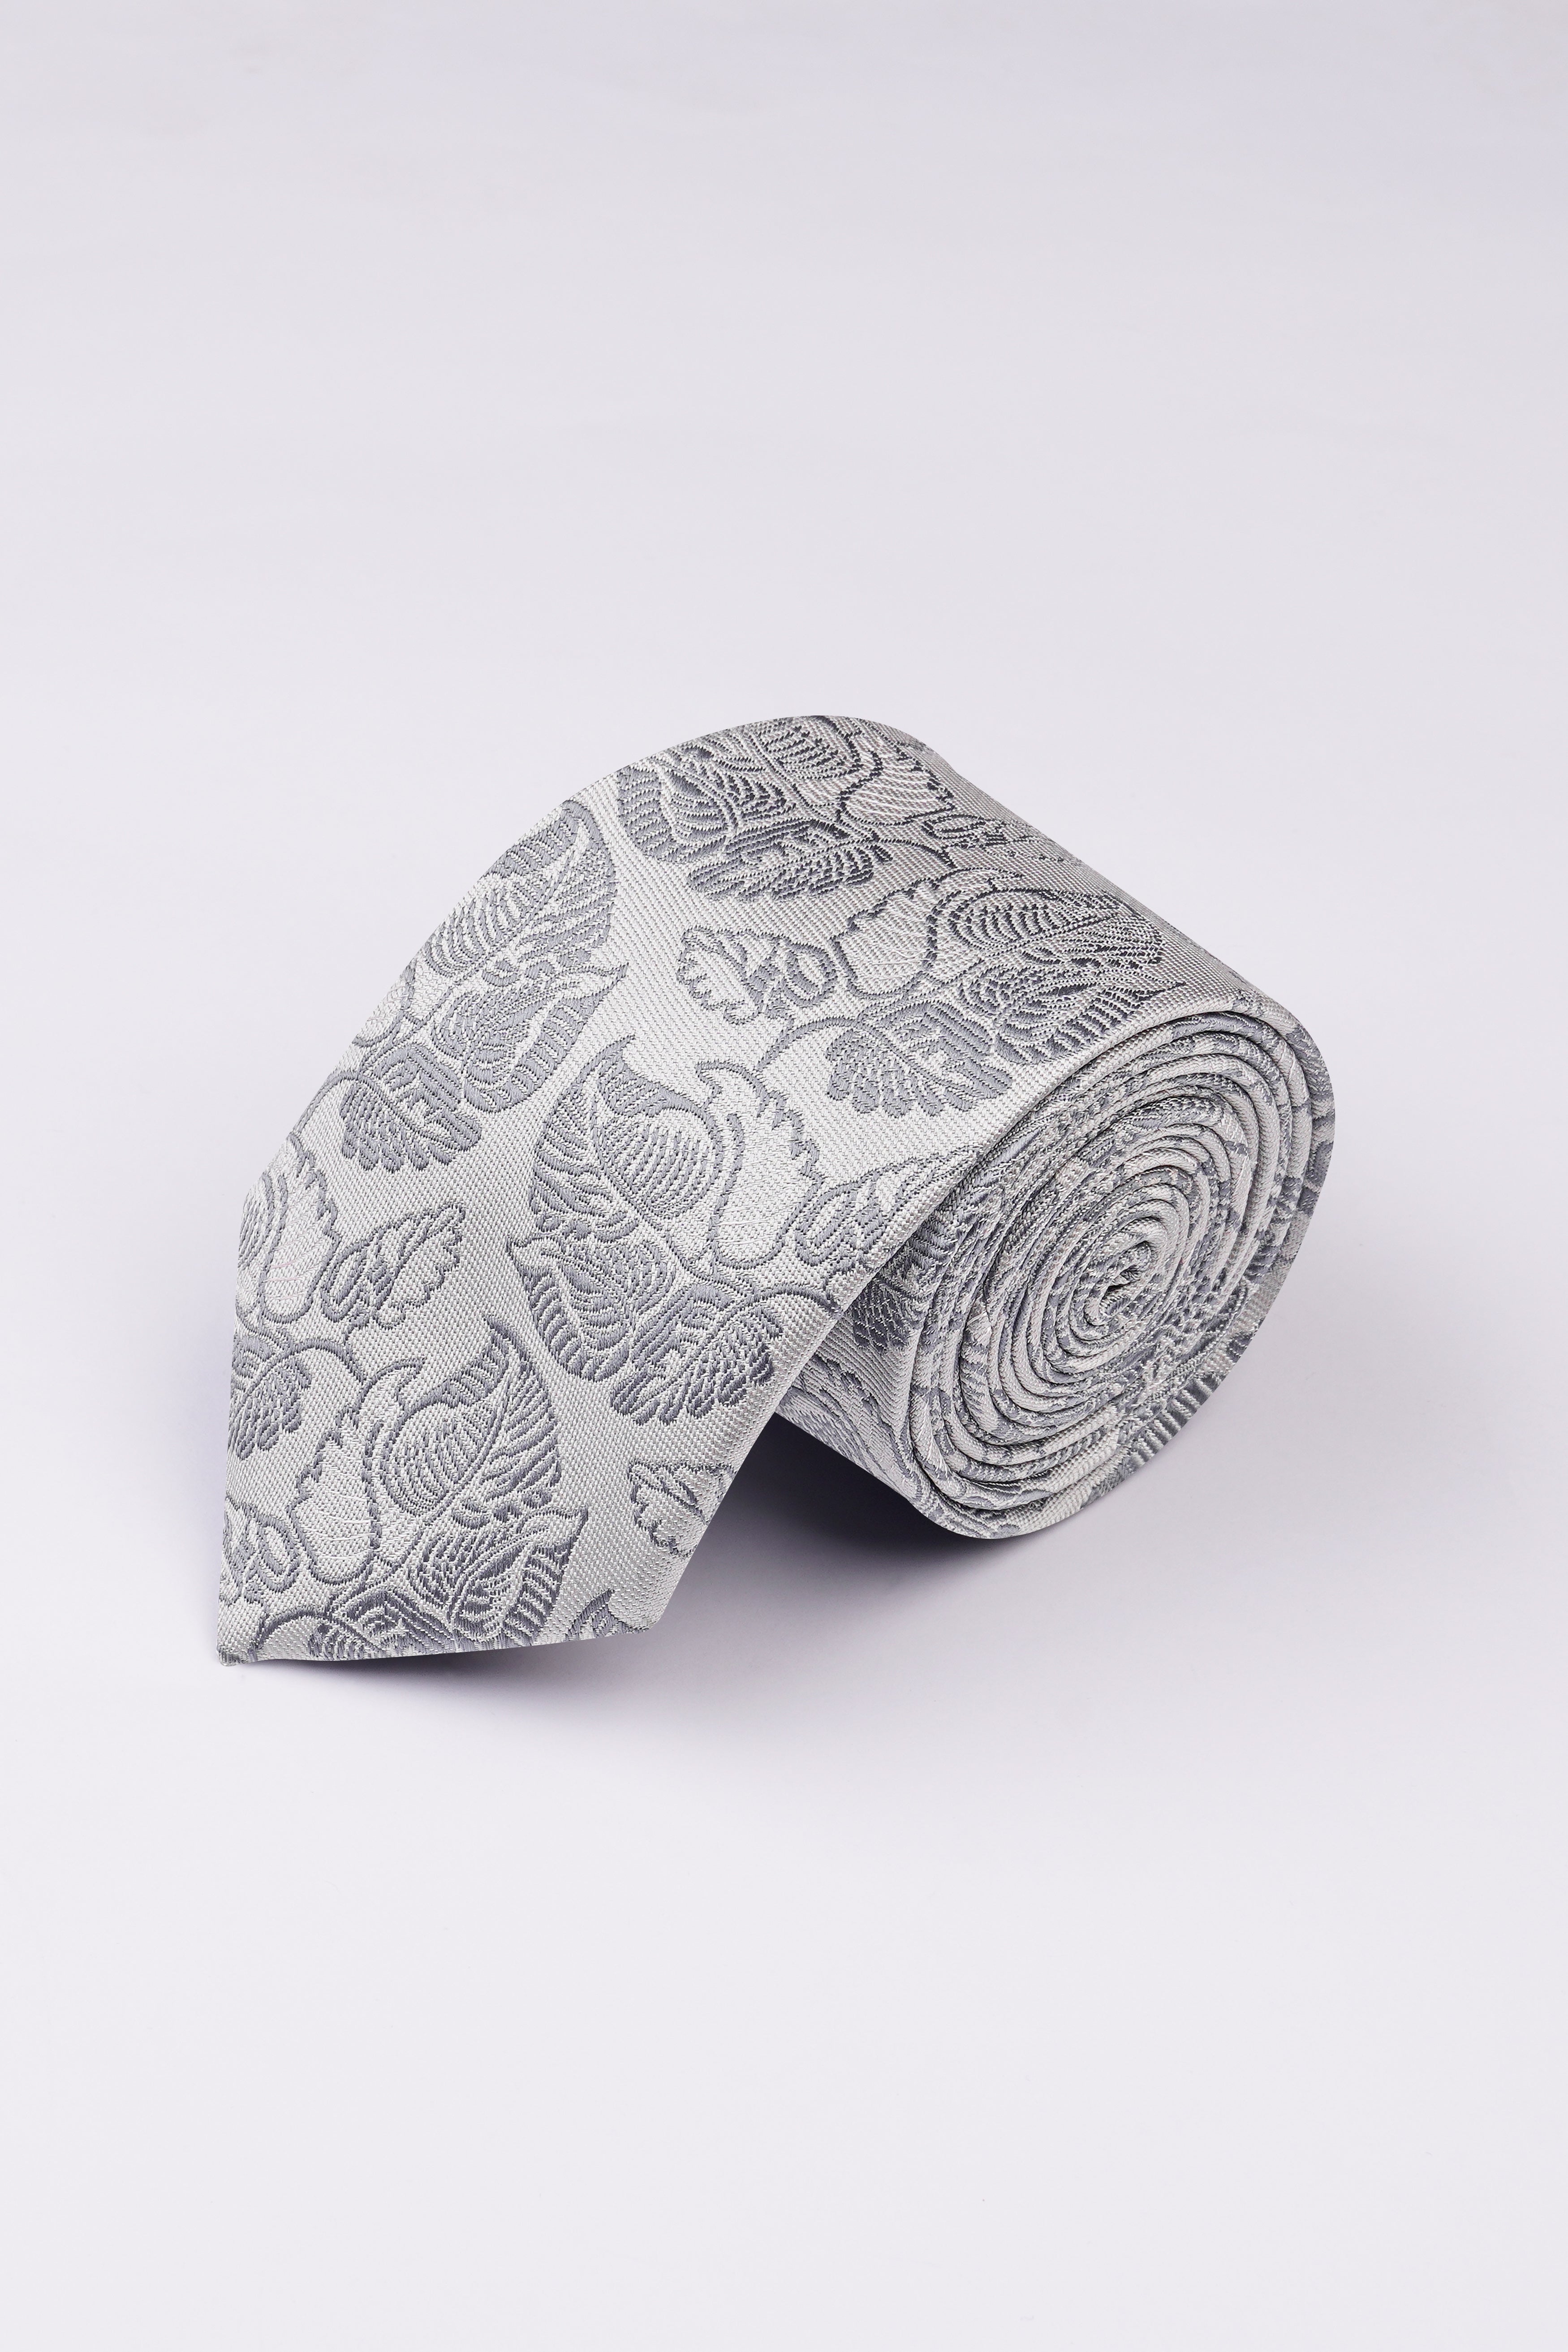 Pale Slate Gray with Mobster Dark Gray Leaves Textured Jacquard Tie with Pocket Square TP066